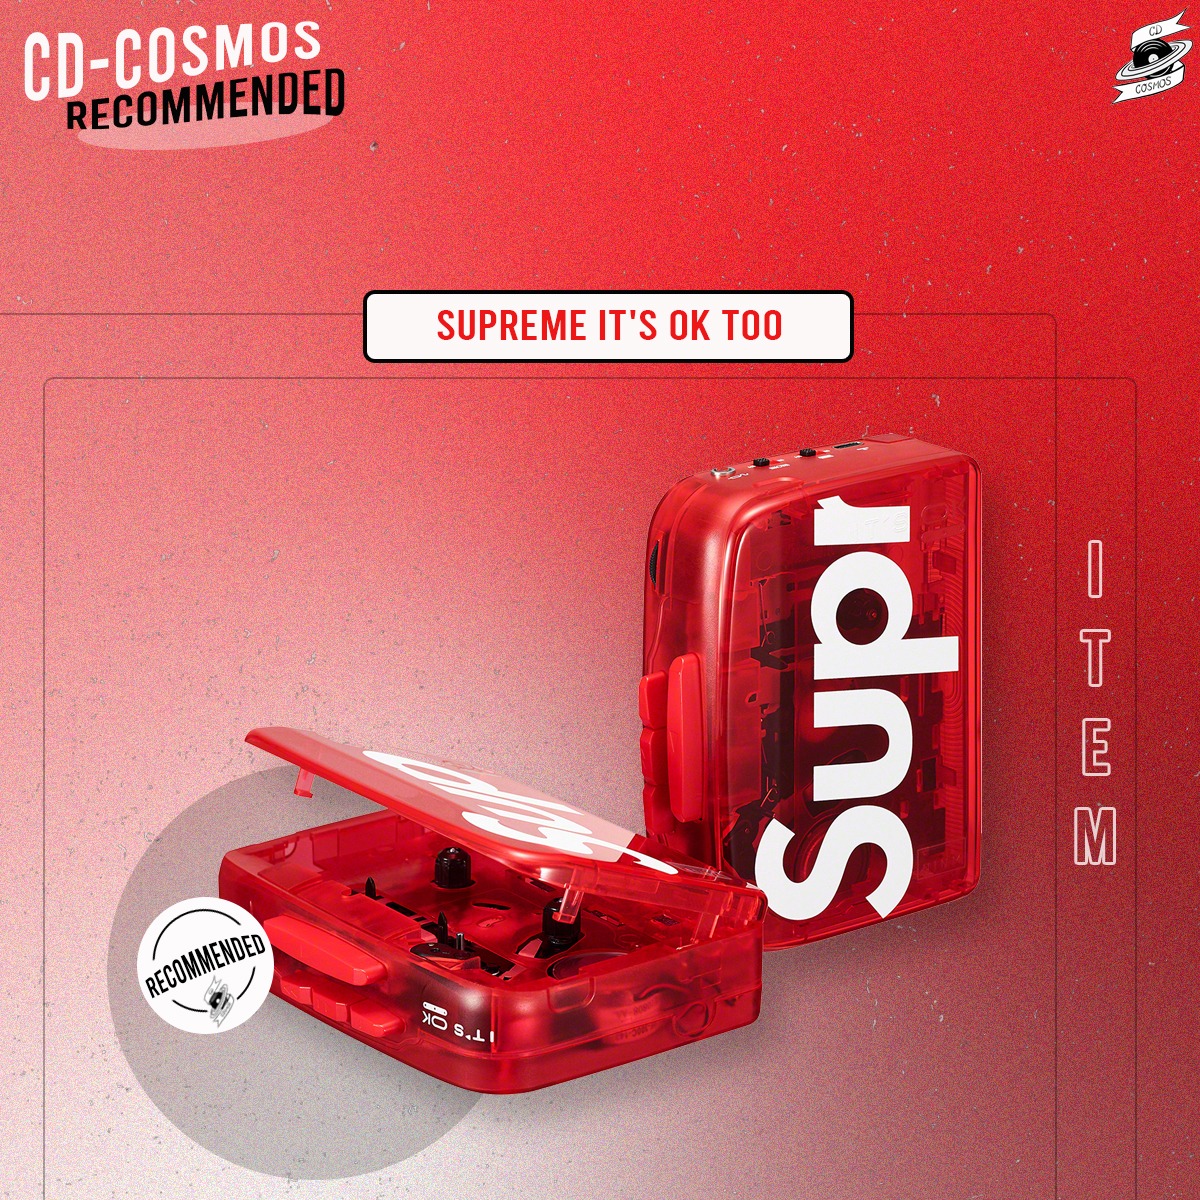 Supreme IT'S OK TOO Cassette Player - cdcosmos